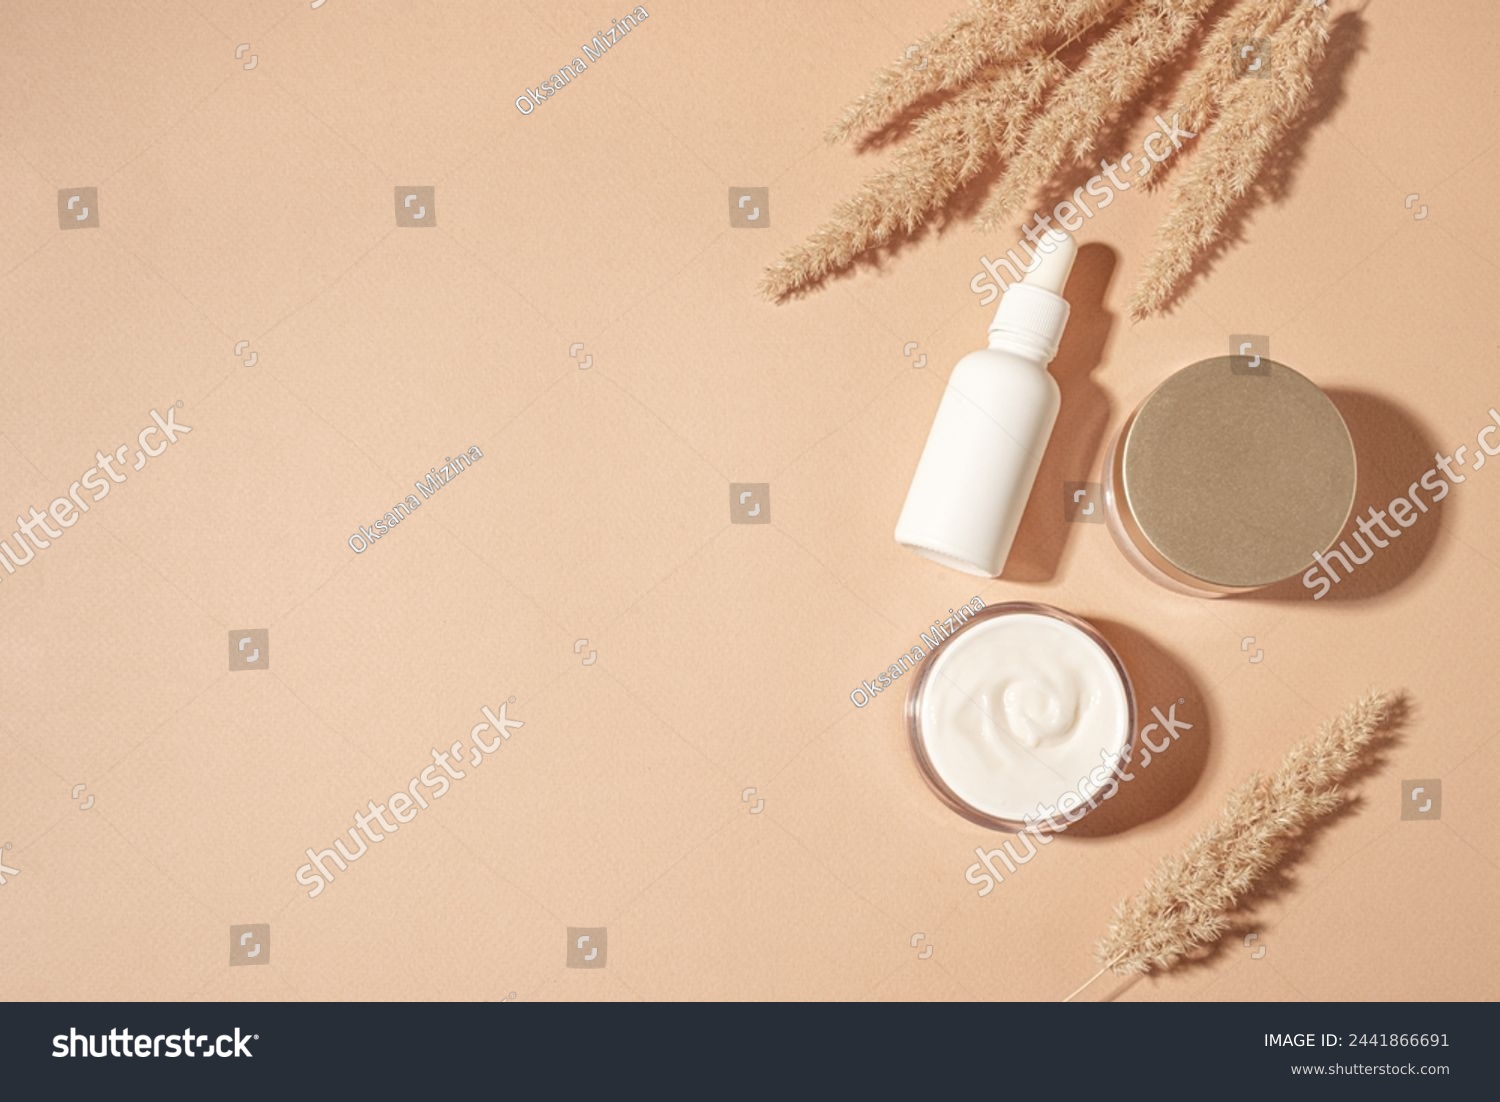 Cosmetic serum and beauty cream products with dry reeds or pampas grass on neutral beige background, trendy flat lay with hard shadows. Facial anti age natural skin care, copy space. #2441866691